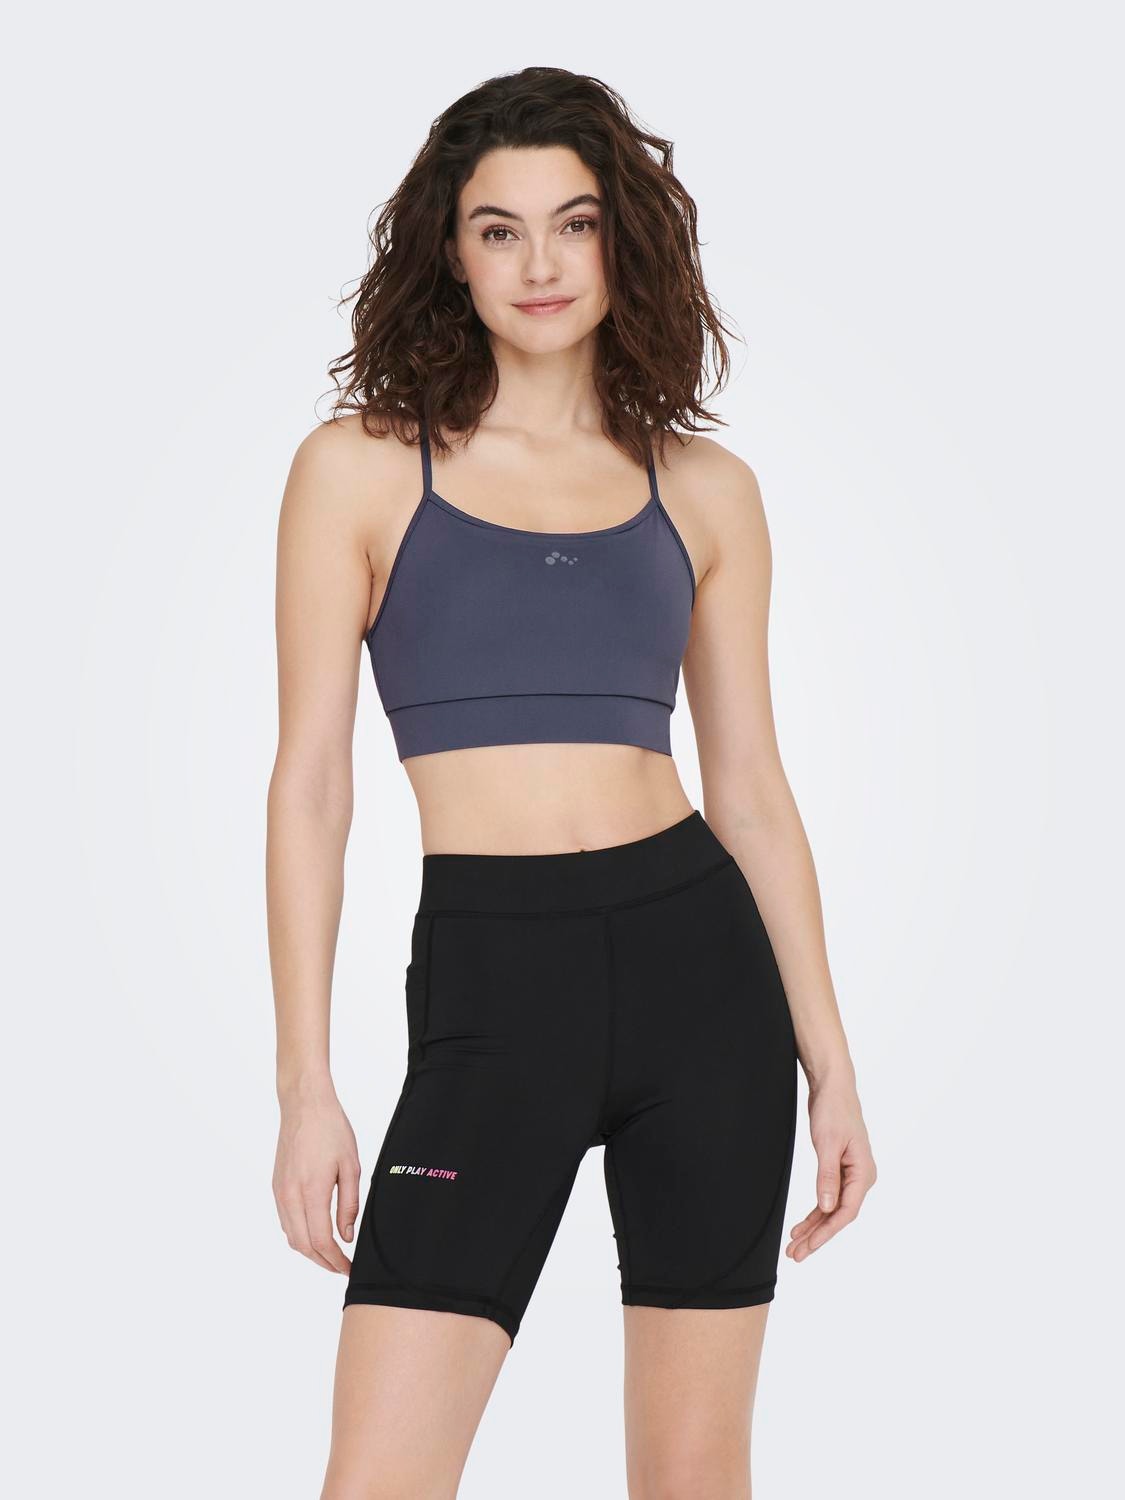 ONLY Sports Bra with Light Support -Graystone - 15279810